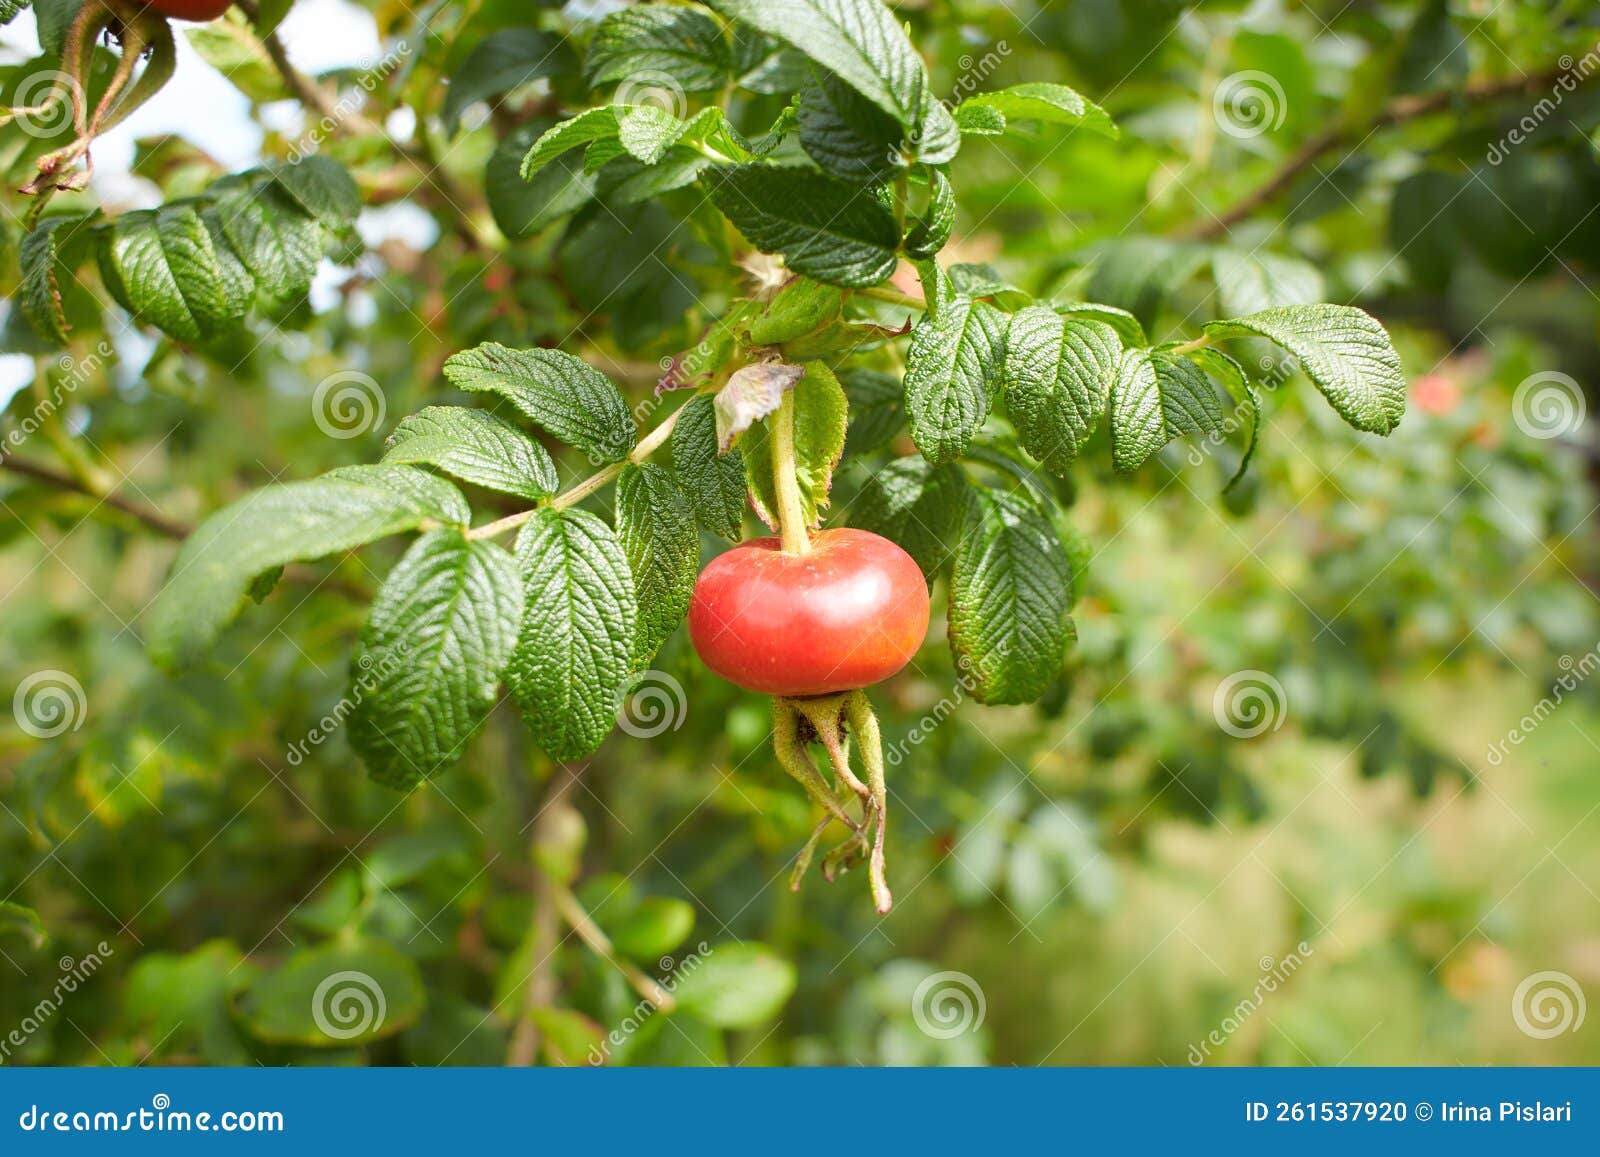 rose hip, also called rose haw and rose hep, an accessory fruit of the plant